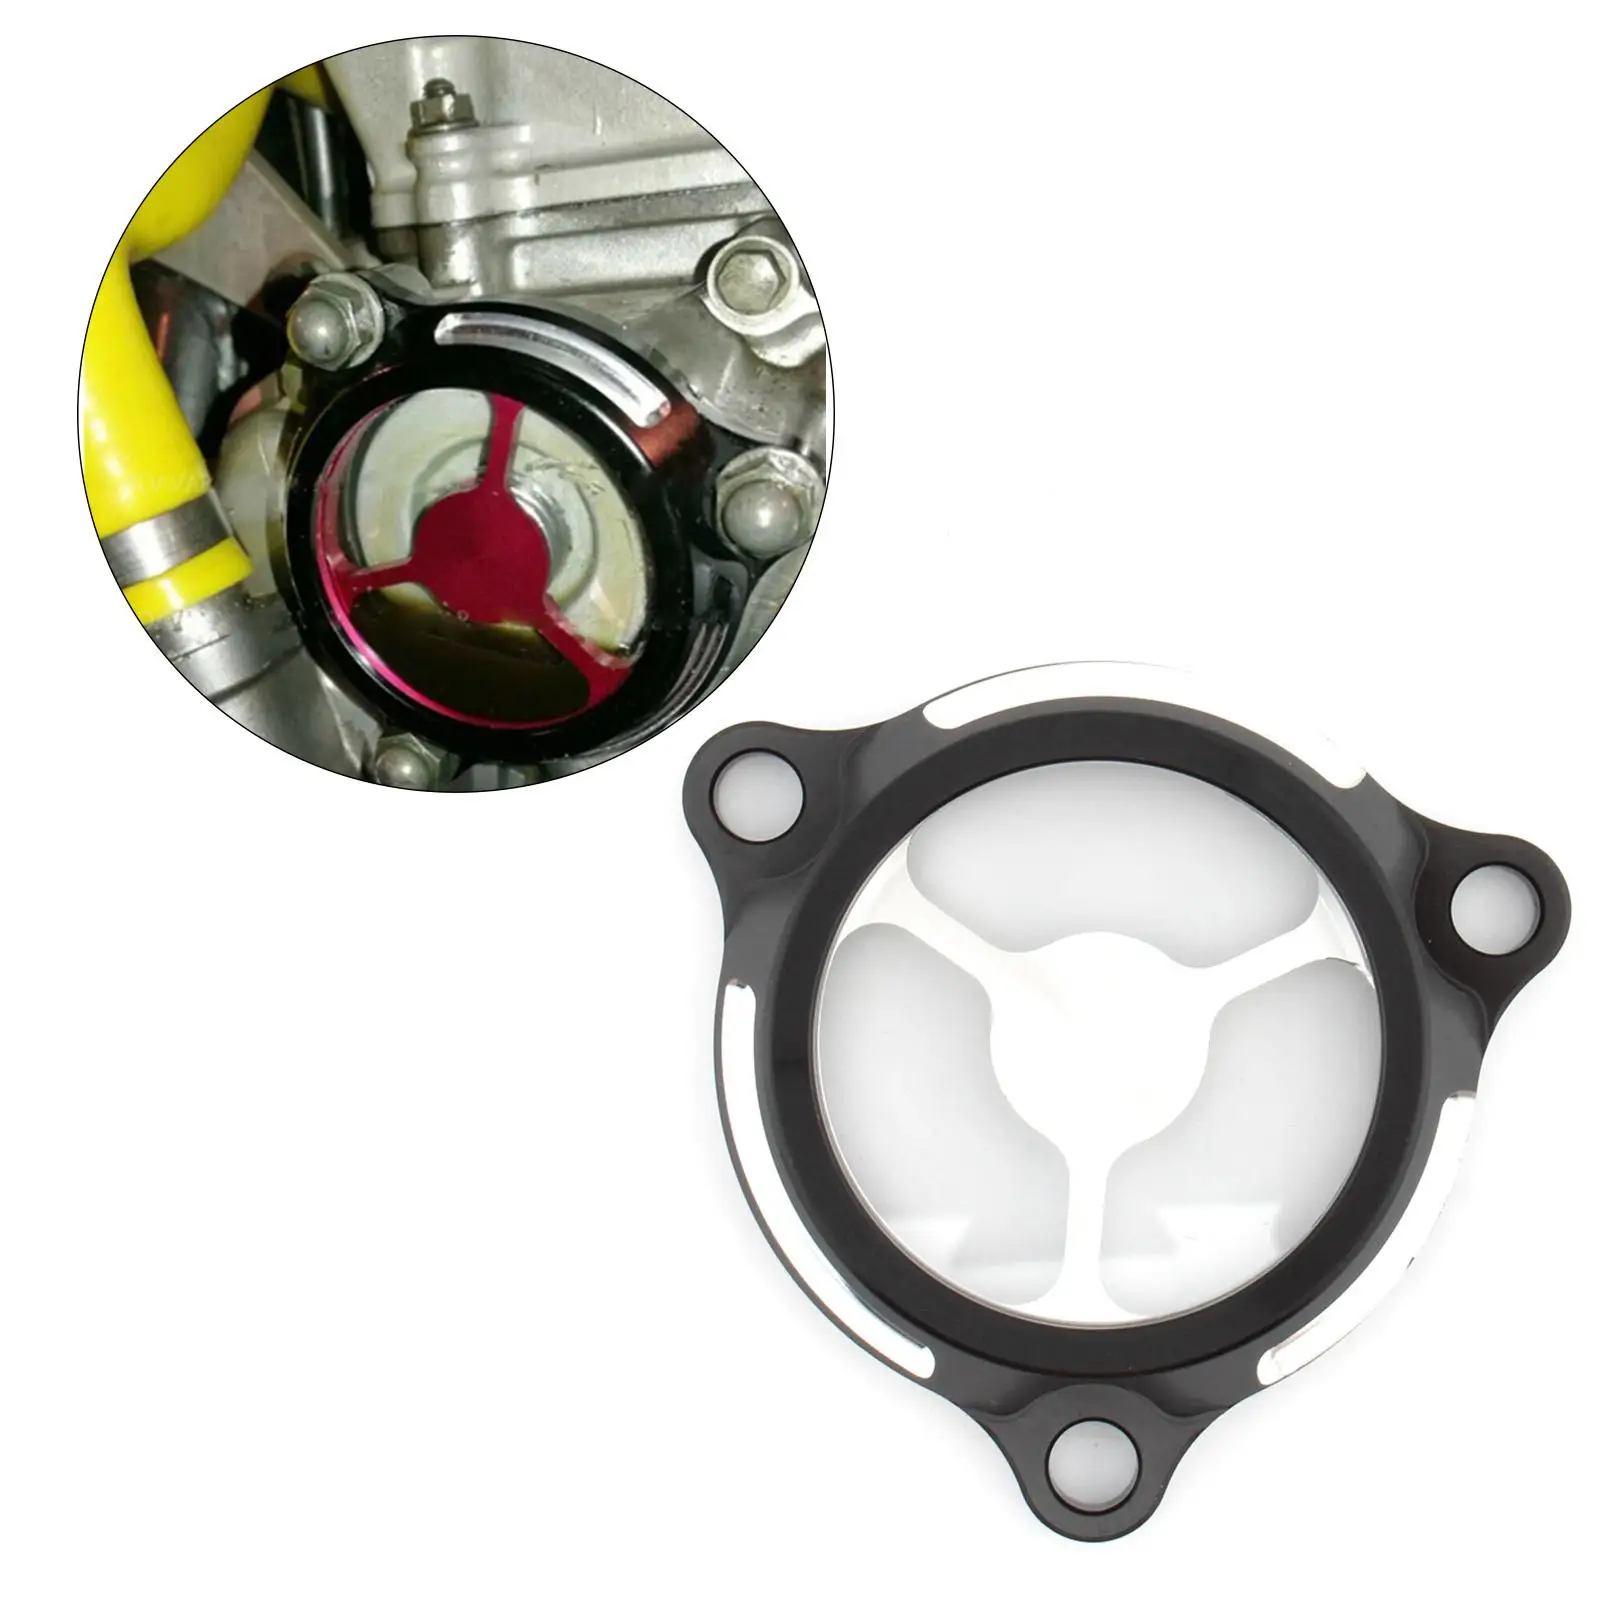 Engine Oil Filter Cover Motorcycle Accessories Fits for Suzuki 05-21 Drz400 Drz 400S Drz400E